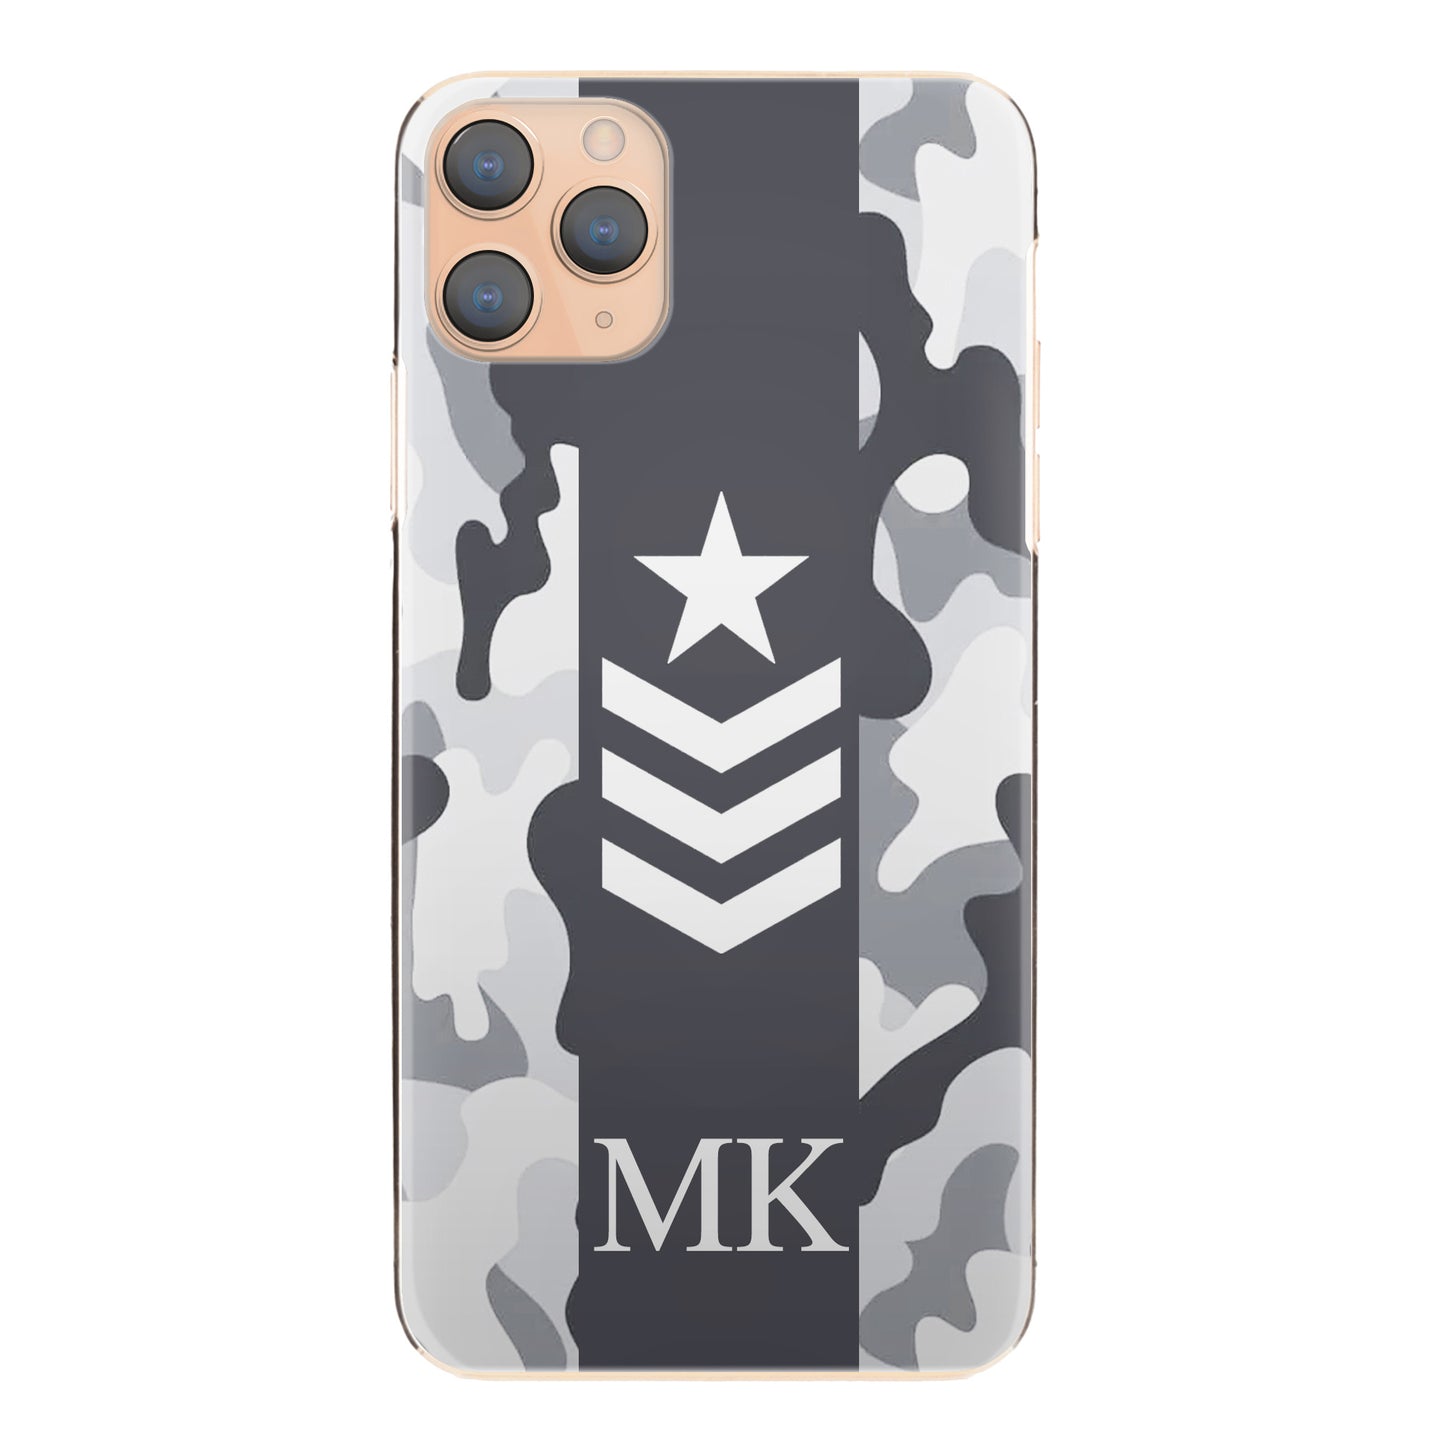 Personalised Google Phone Hard Case with Initials and Army Rank on Artic Camo